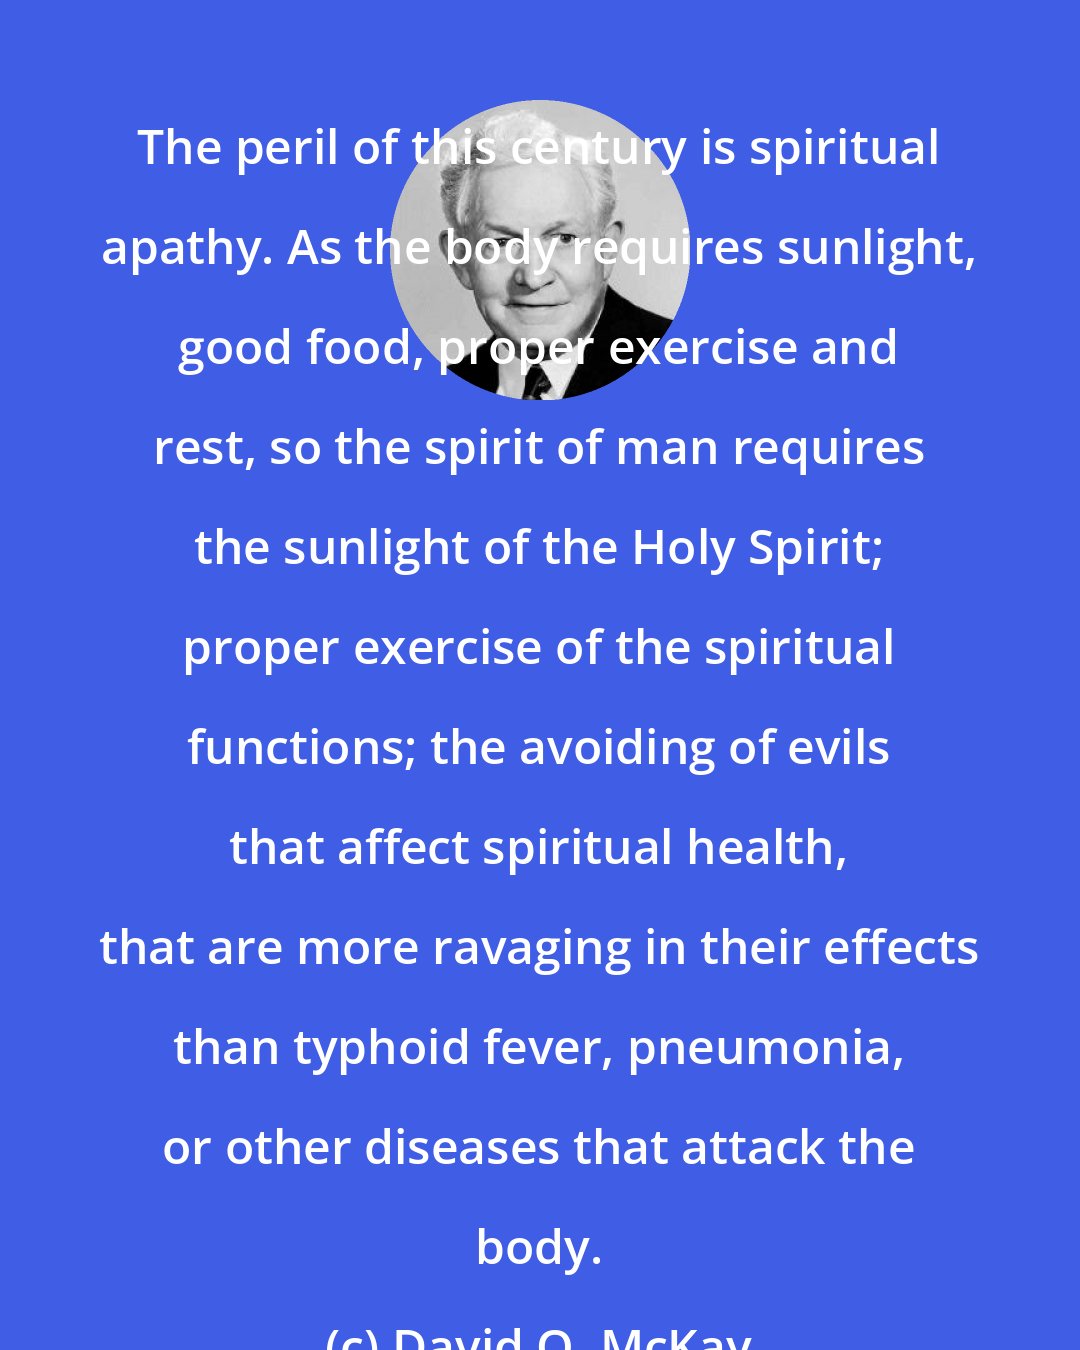 David O. McKay: The peril of this century is spiritual apathy. As the body requires sunlight, good food, proper exercise and rest, so the spirit of man requires the sunlight of the Holy Spirit; proper exercise of the spiritual functions; the avoiding of evils that affect spiritual health, that are more ravaging in their effects than typhoid fever, pneumonia, or other diseases that attack the body.